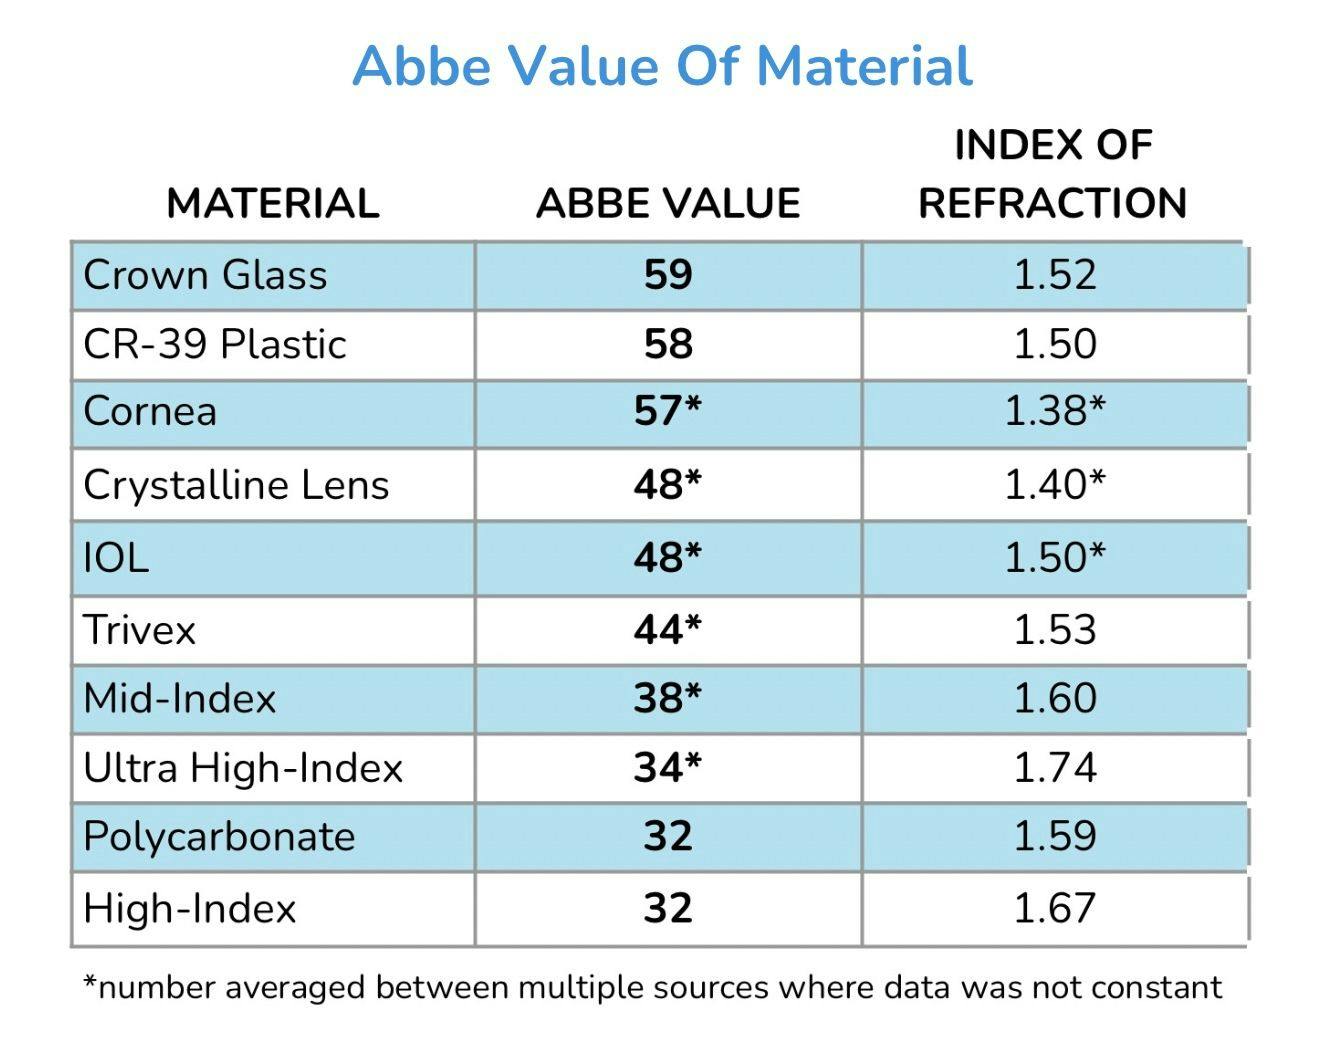 Abbe value of material